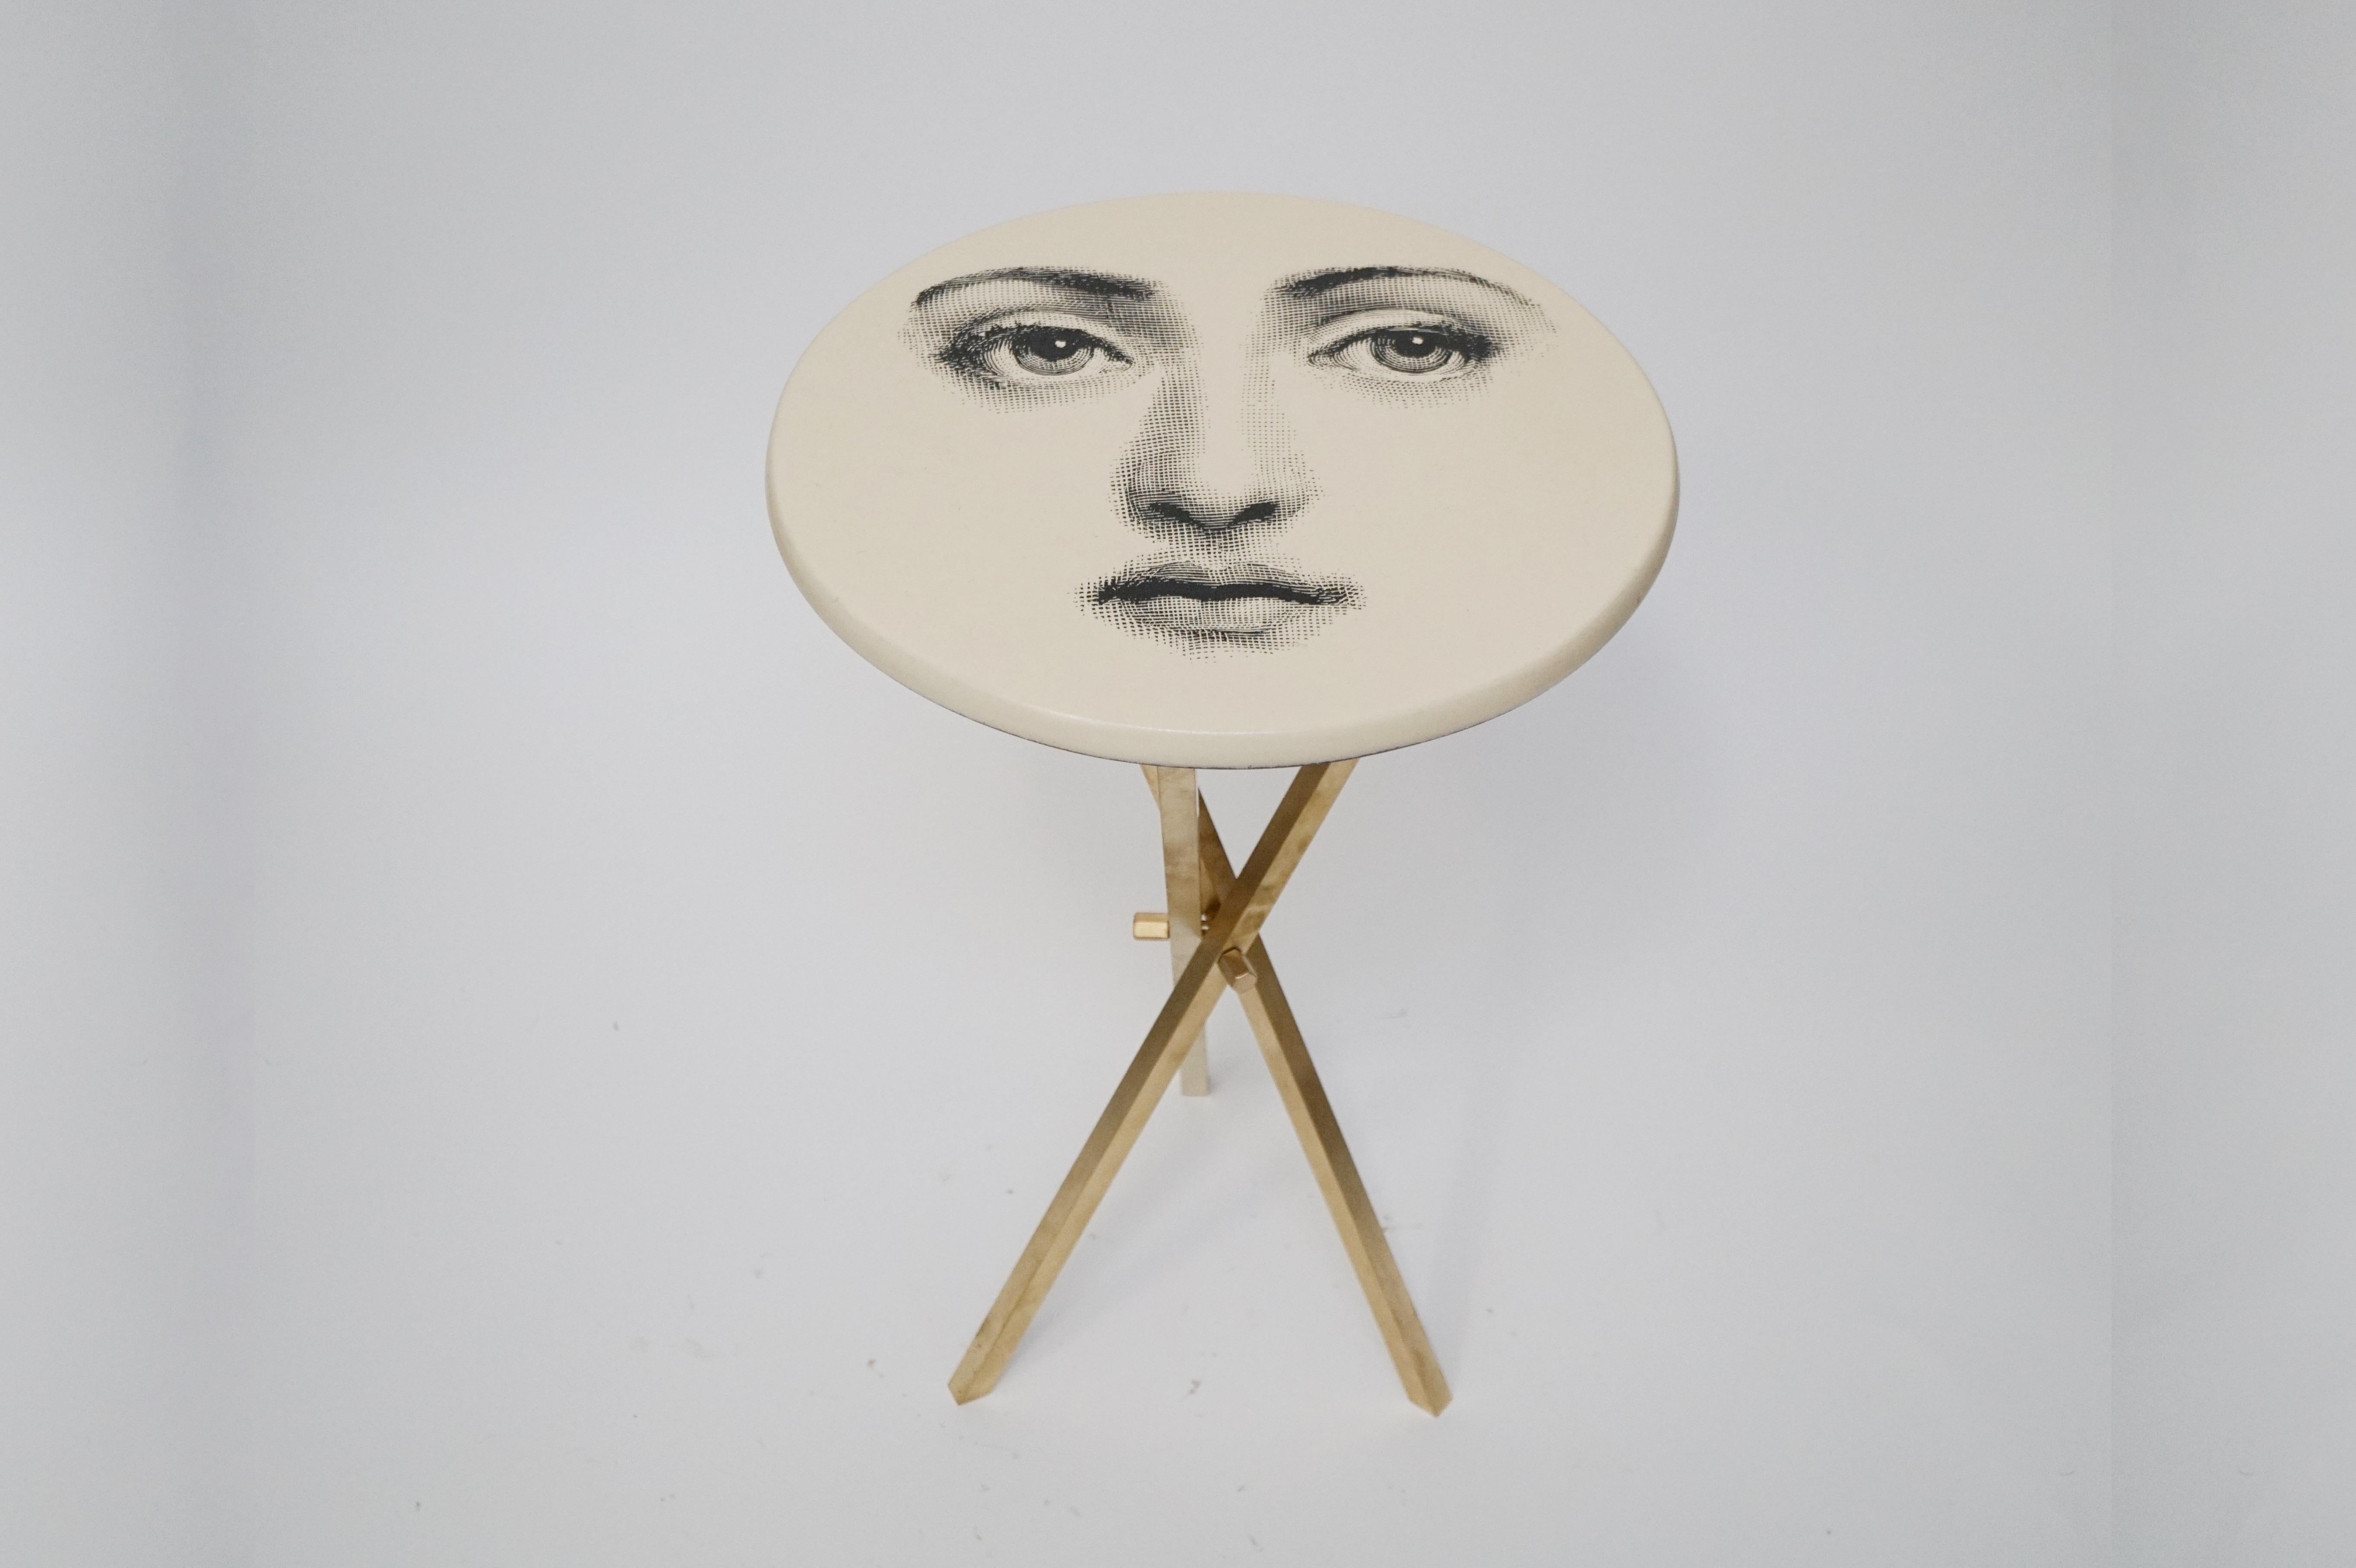 This fun and whimsical collectors item is a side table by Piero Fornasetti, signed underneath with its original label. The side table is affixed on top of a brass tri-pod base which is removable for easy and economical shipping or